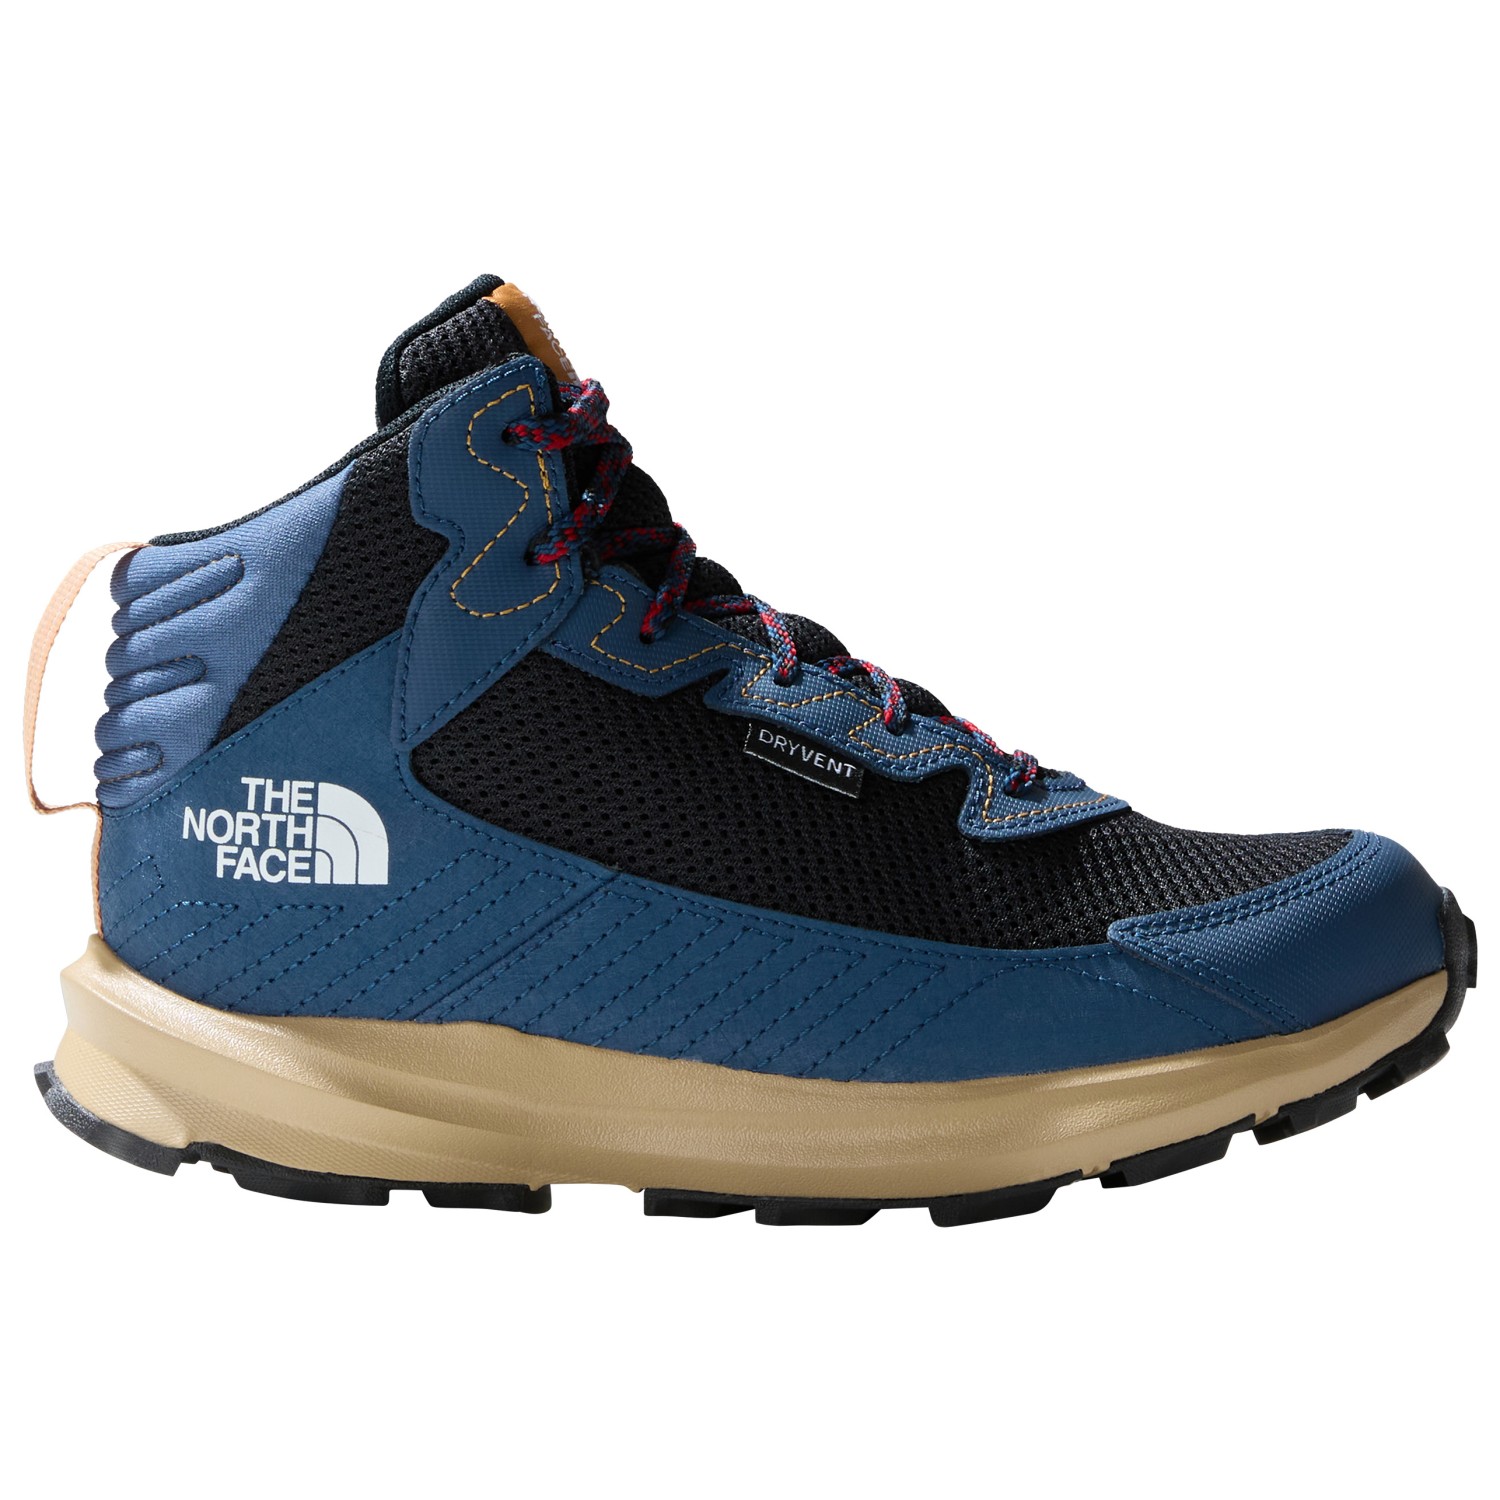 Ботинки для прогулки The North Face Youth Fastpack Hiker Mid WP, цвет Shady Blue/TNF White